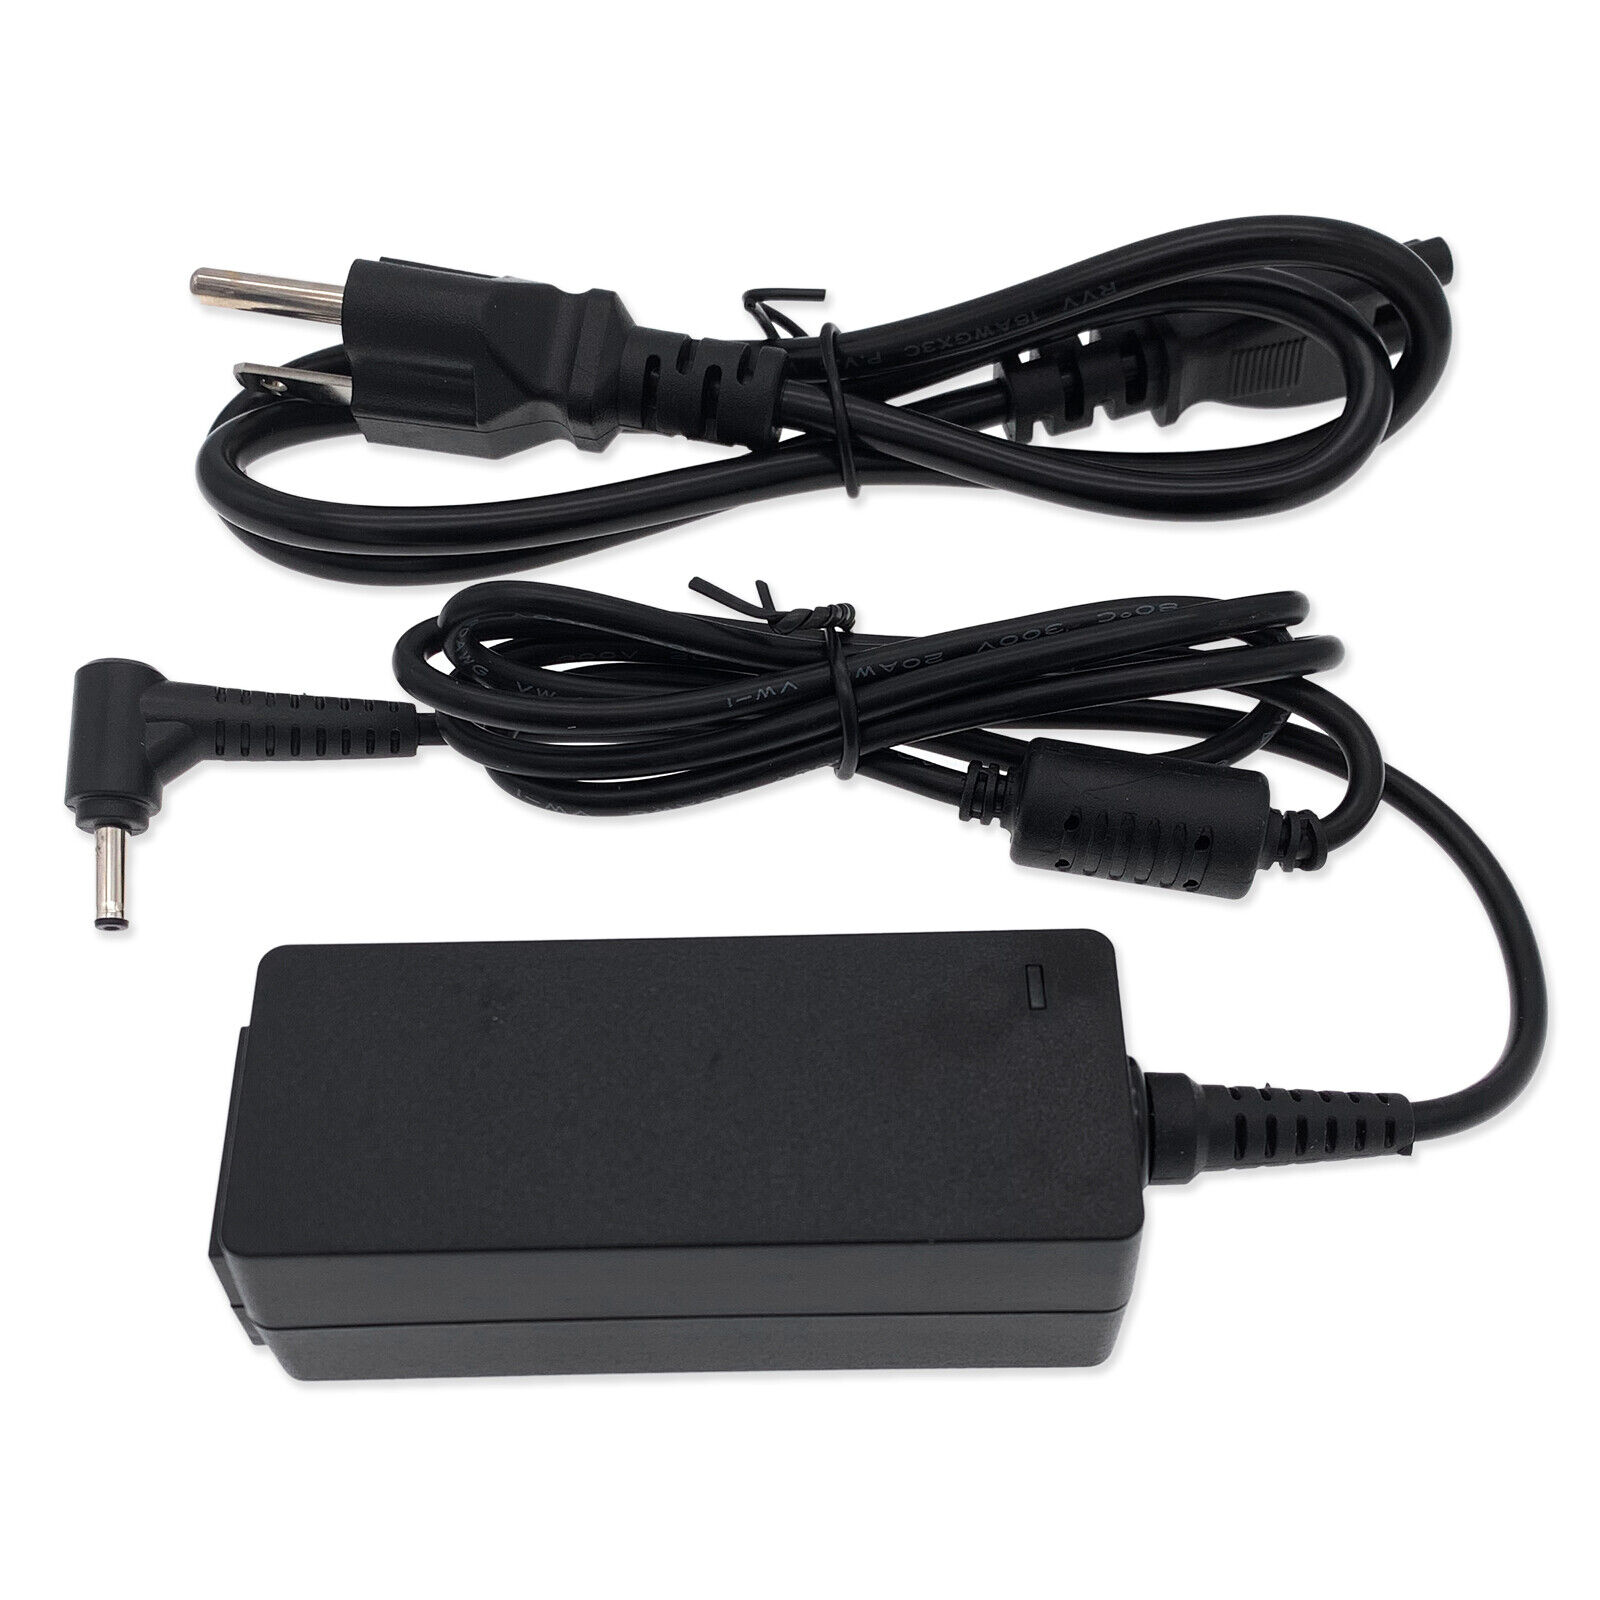 19V 1.75A 33W AC Adapter Power Supply For Asus VivoBook 0A001-00330100 Notebook